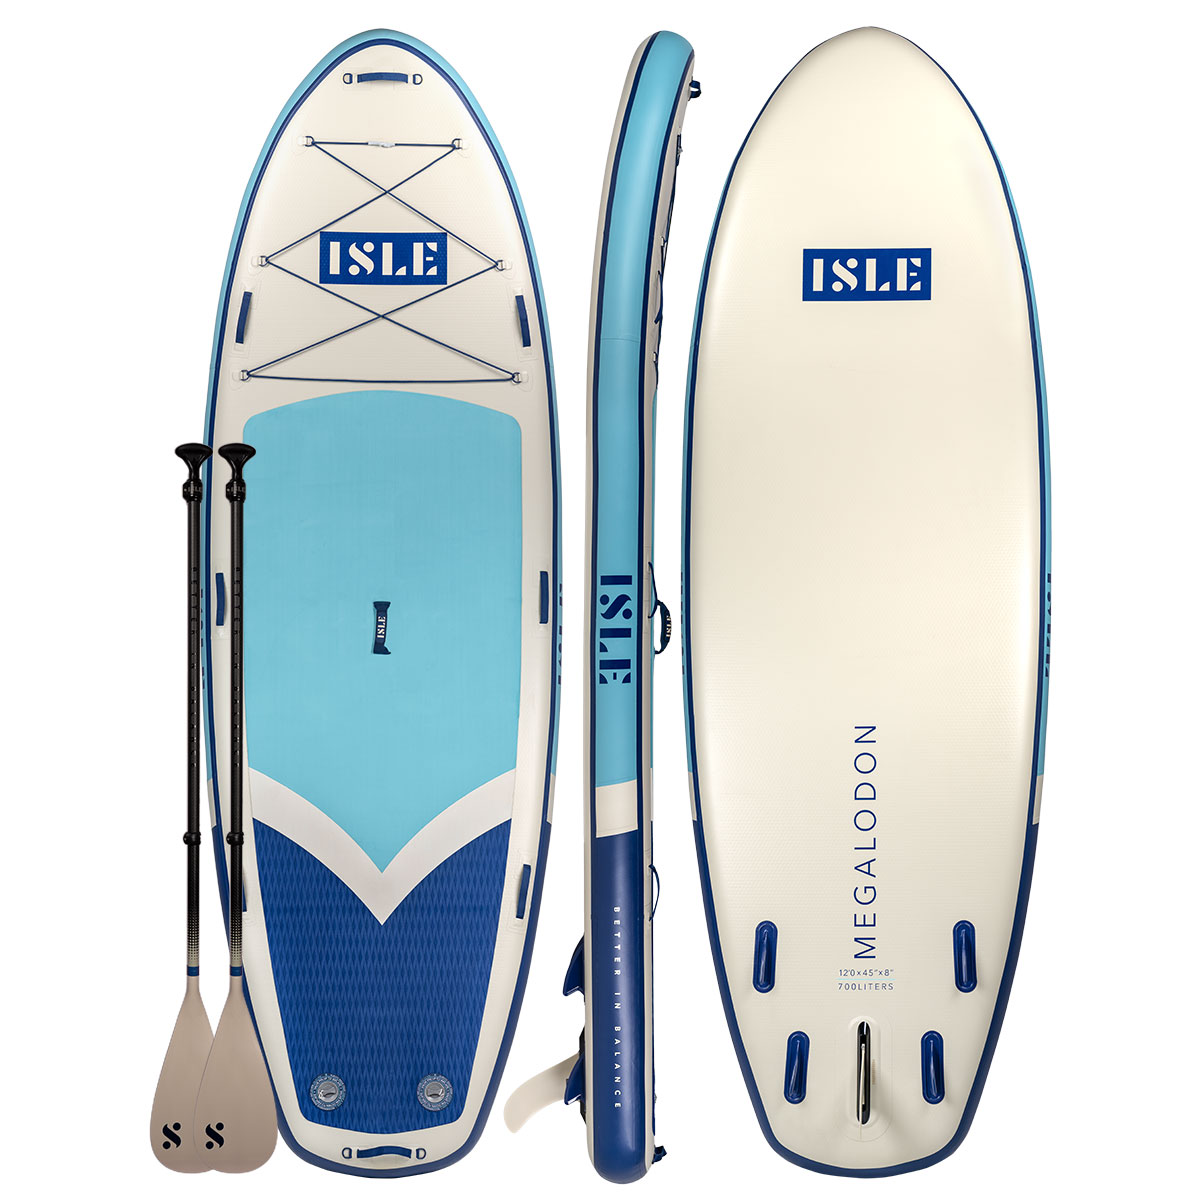 Megalodon 2.0Stand Up Paddle Board PackageThe perfect board for bringing friends and family along for tandem paddling, this multi-person, inflatable paddle board is constructed with a double-layer drop stitch construction, making it our most durable build yet. It's the largest SUP in our collection, made for the most fun.